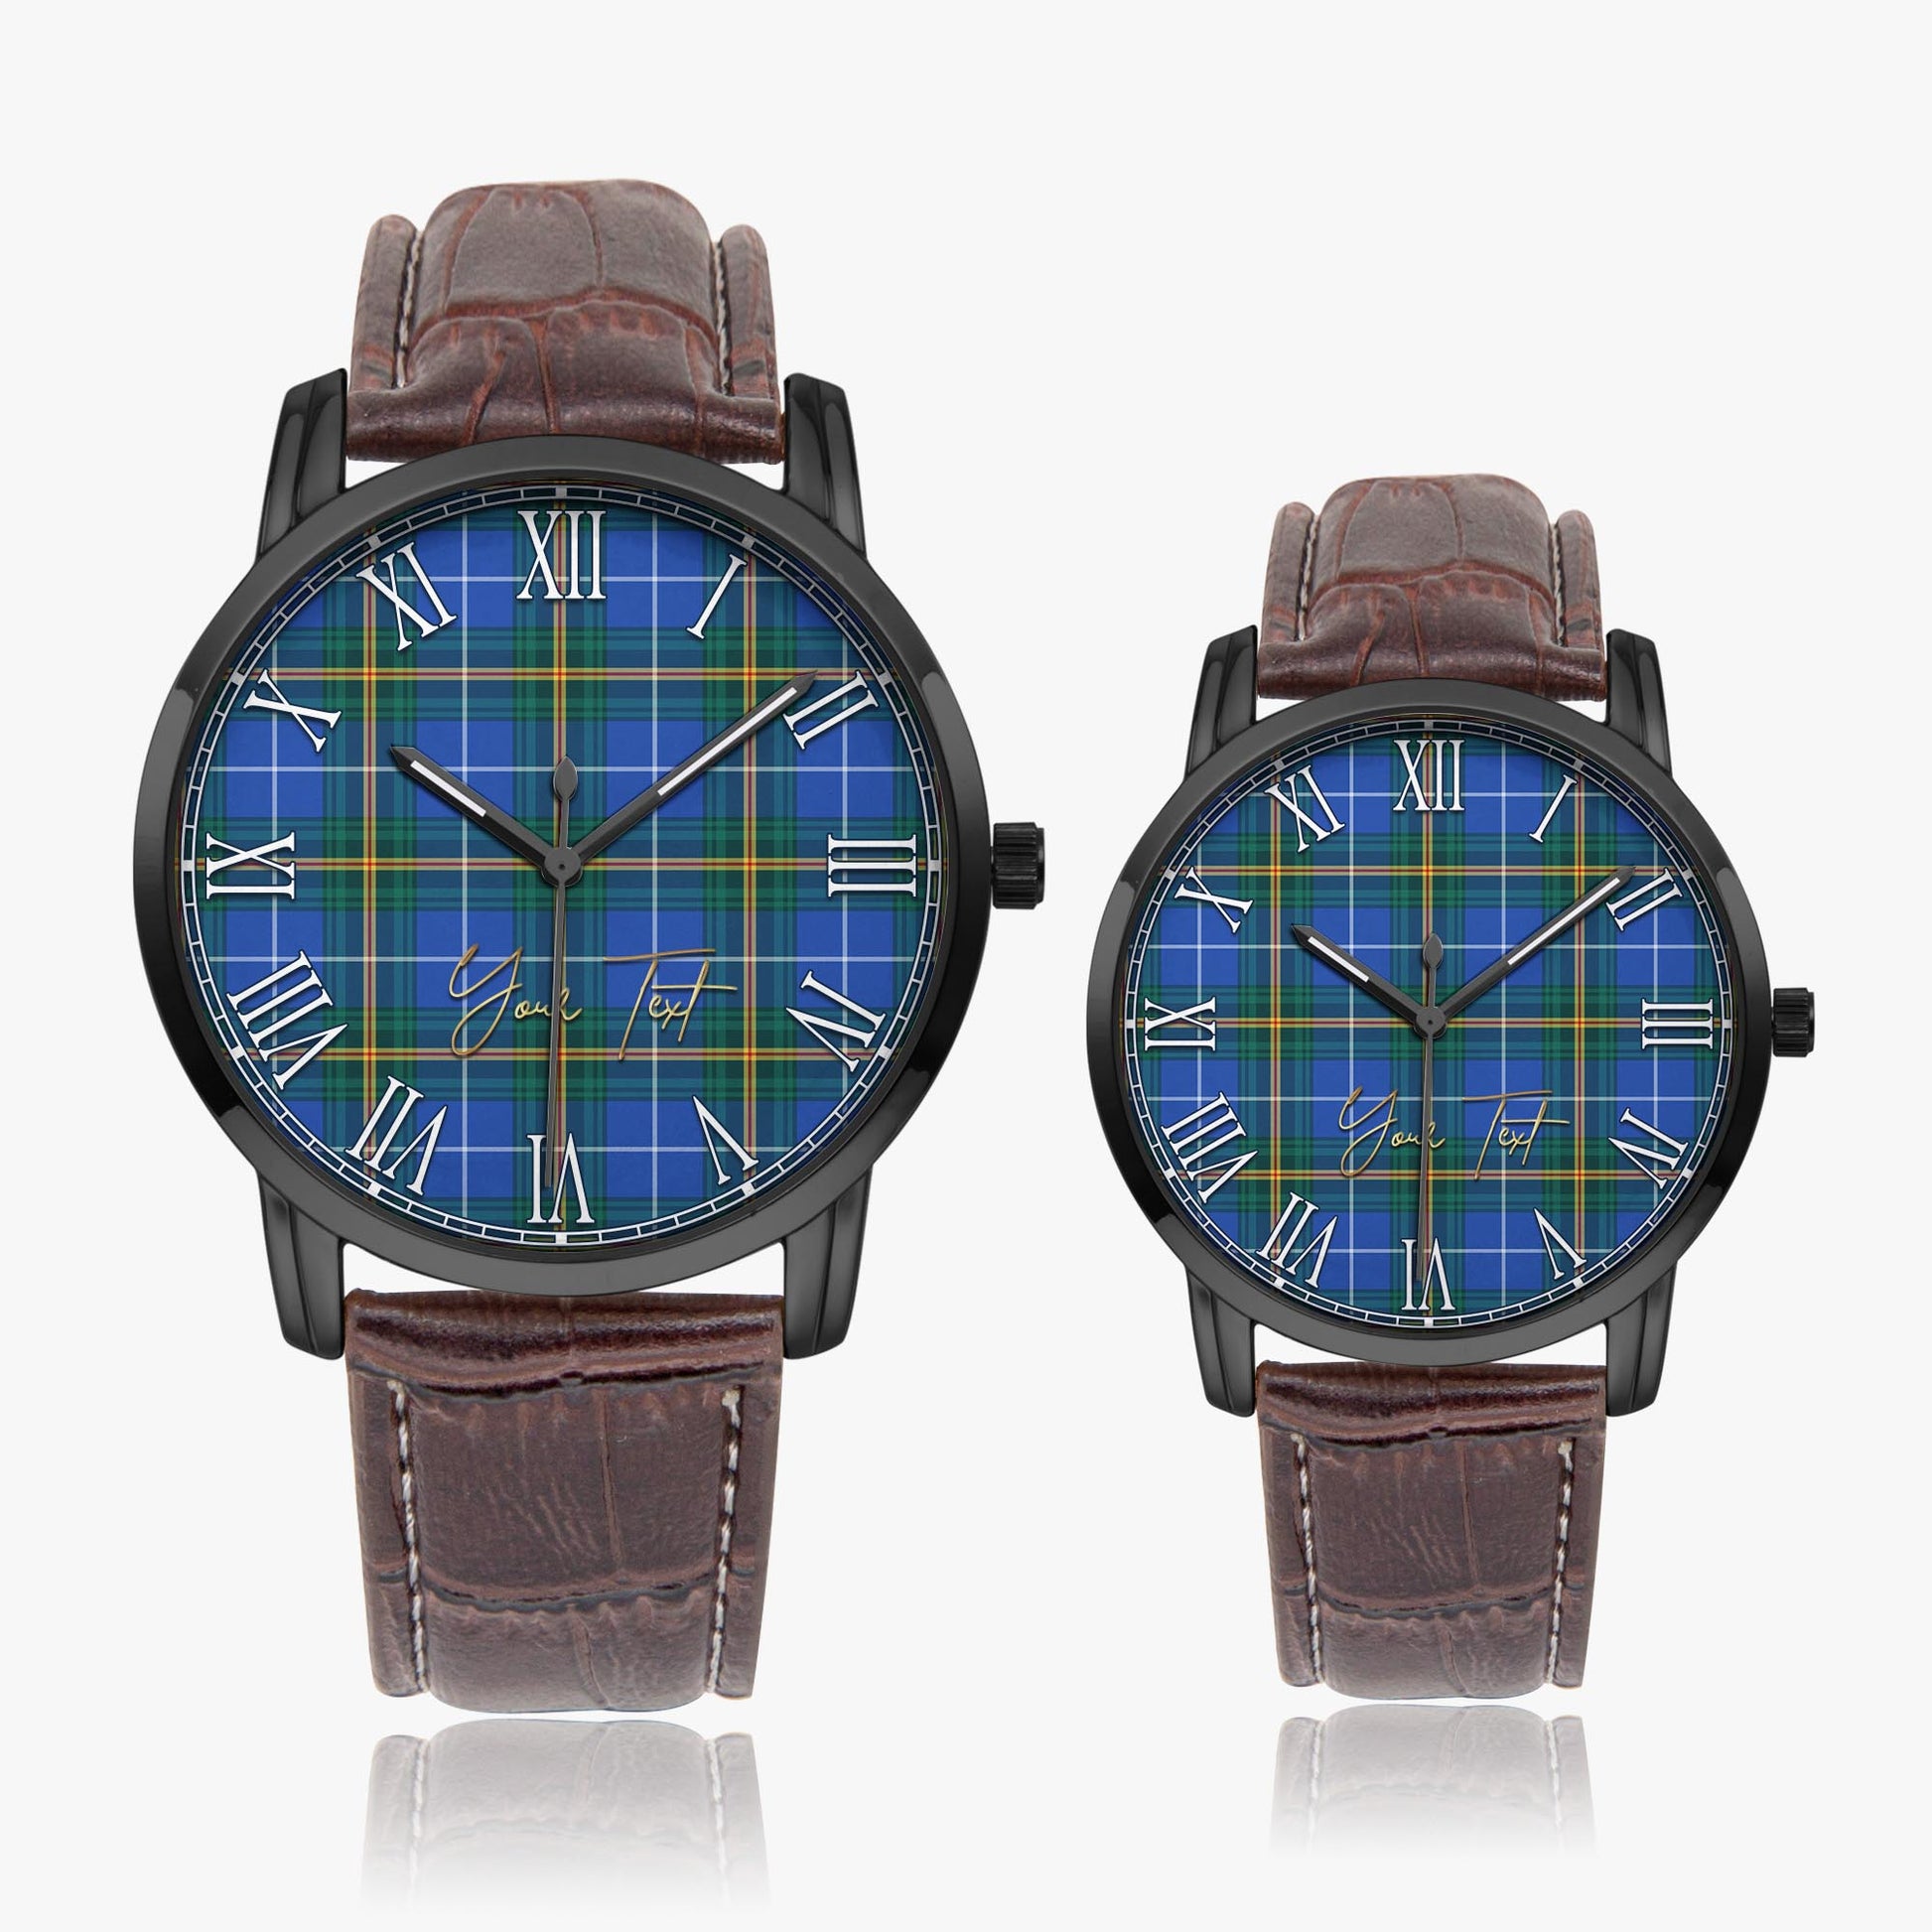 Nova Scotia Province Canada Tartan Personalized Your Text Leather Trap Quartz Watch Wide Type Black Case With Brown Leather Strap - Tartanvibesclothing